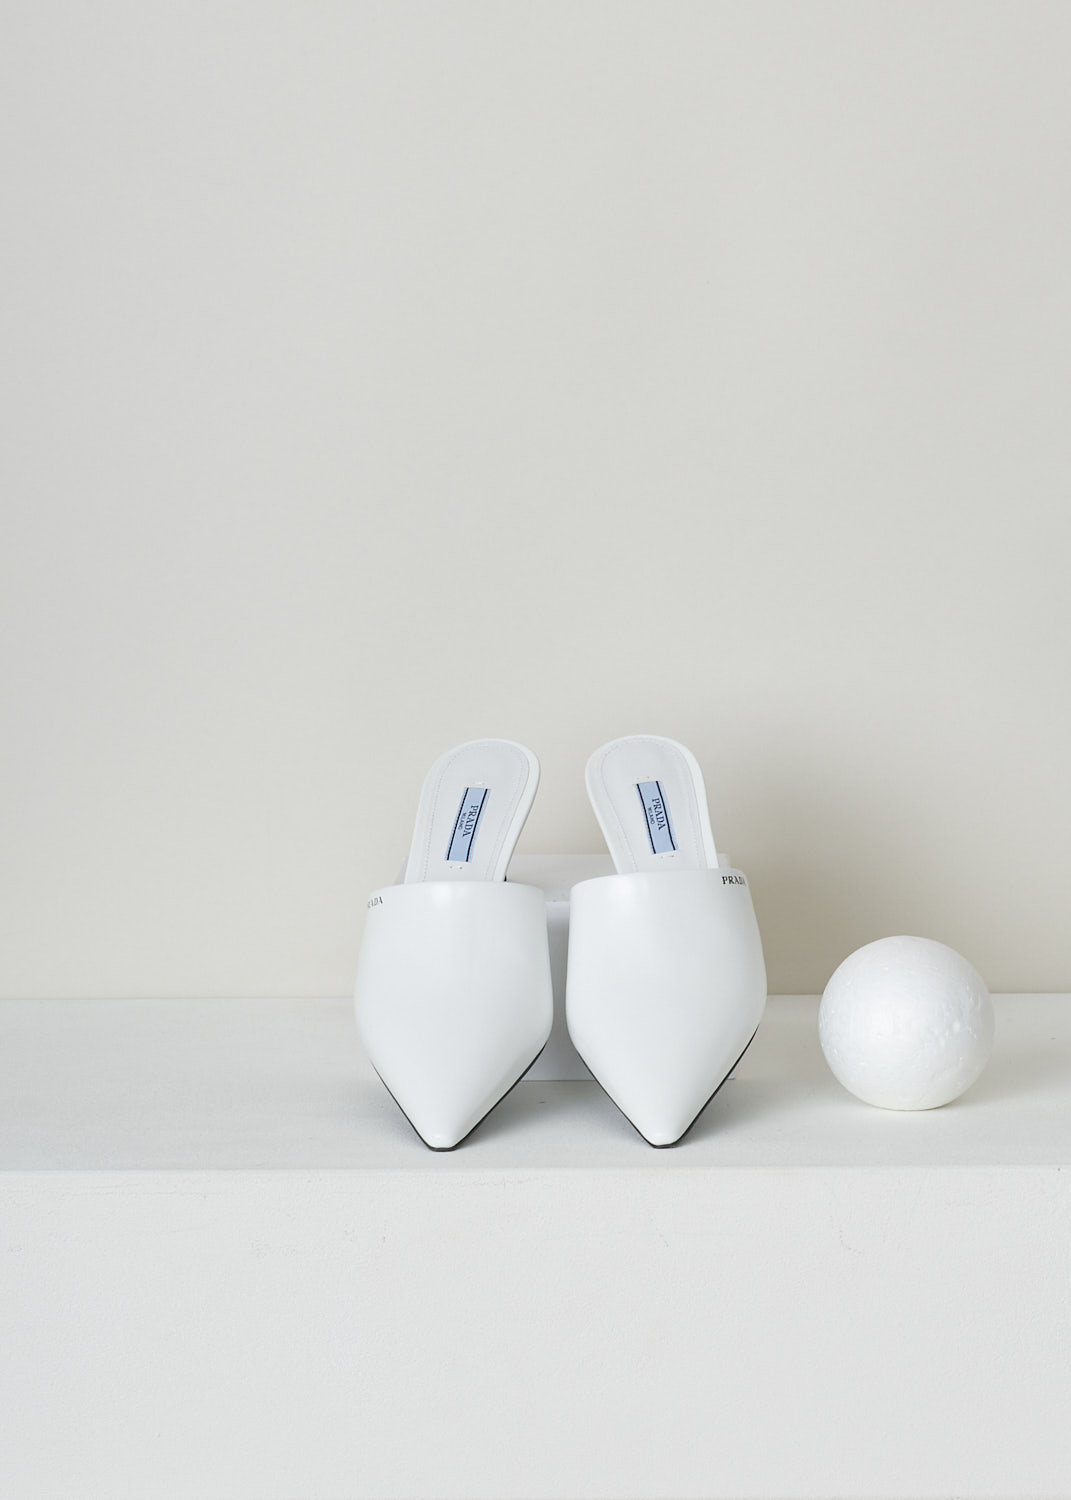 PRADA, WHITE POINTED MULES WITH HEEL, SPAZZOLATO_1S520M_F0009_BIANCO,  White, Top, These white leather mules have a pointed toe and mid-high stiletto heel. These slip-on mules have a contrasting black sole and heel tip. Along the topline, the brand name can be found in black.
